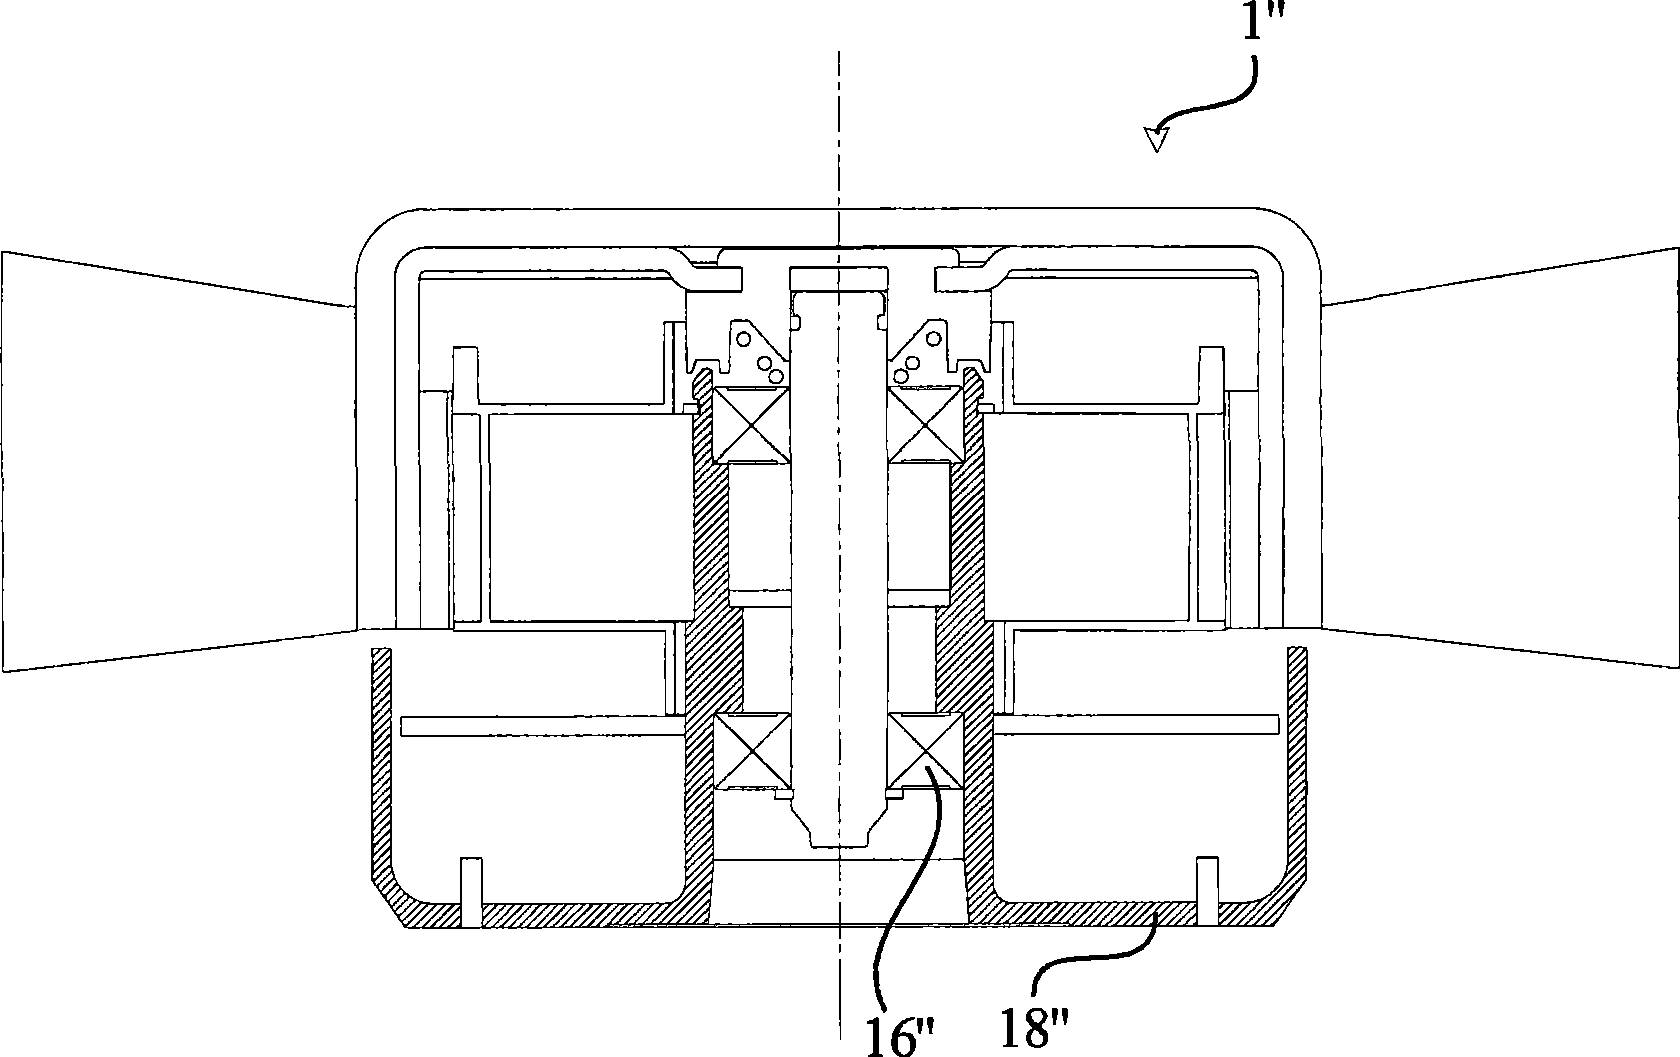 Fan and stator holder thereof